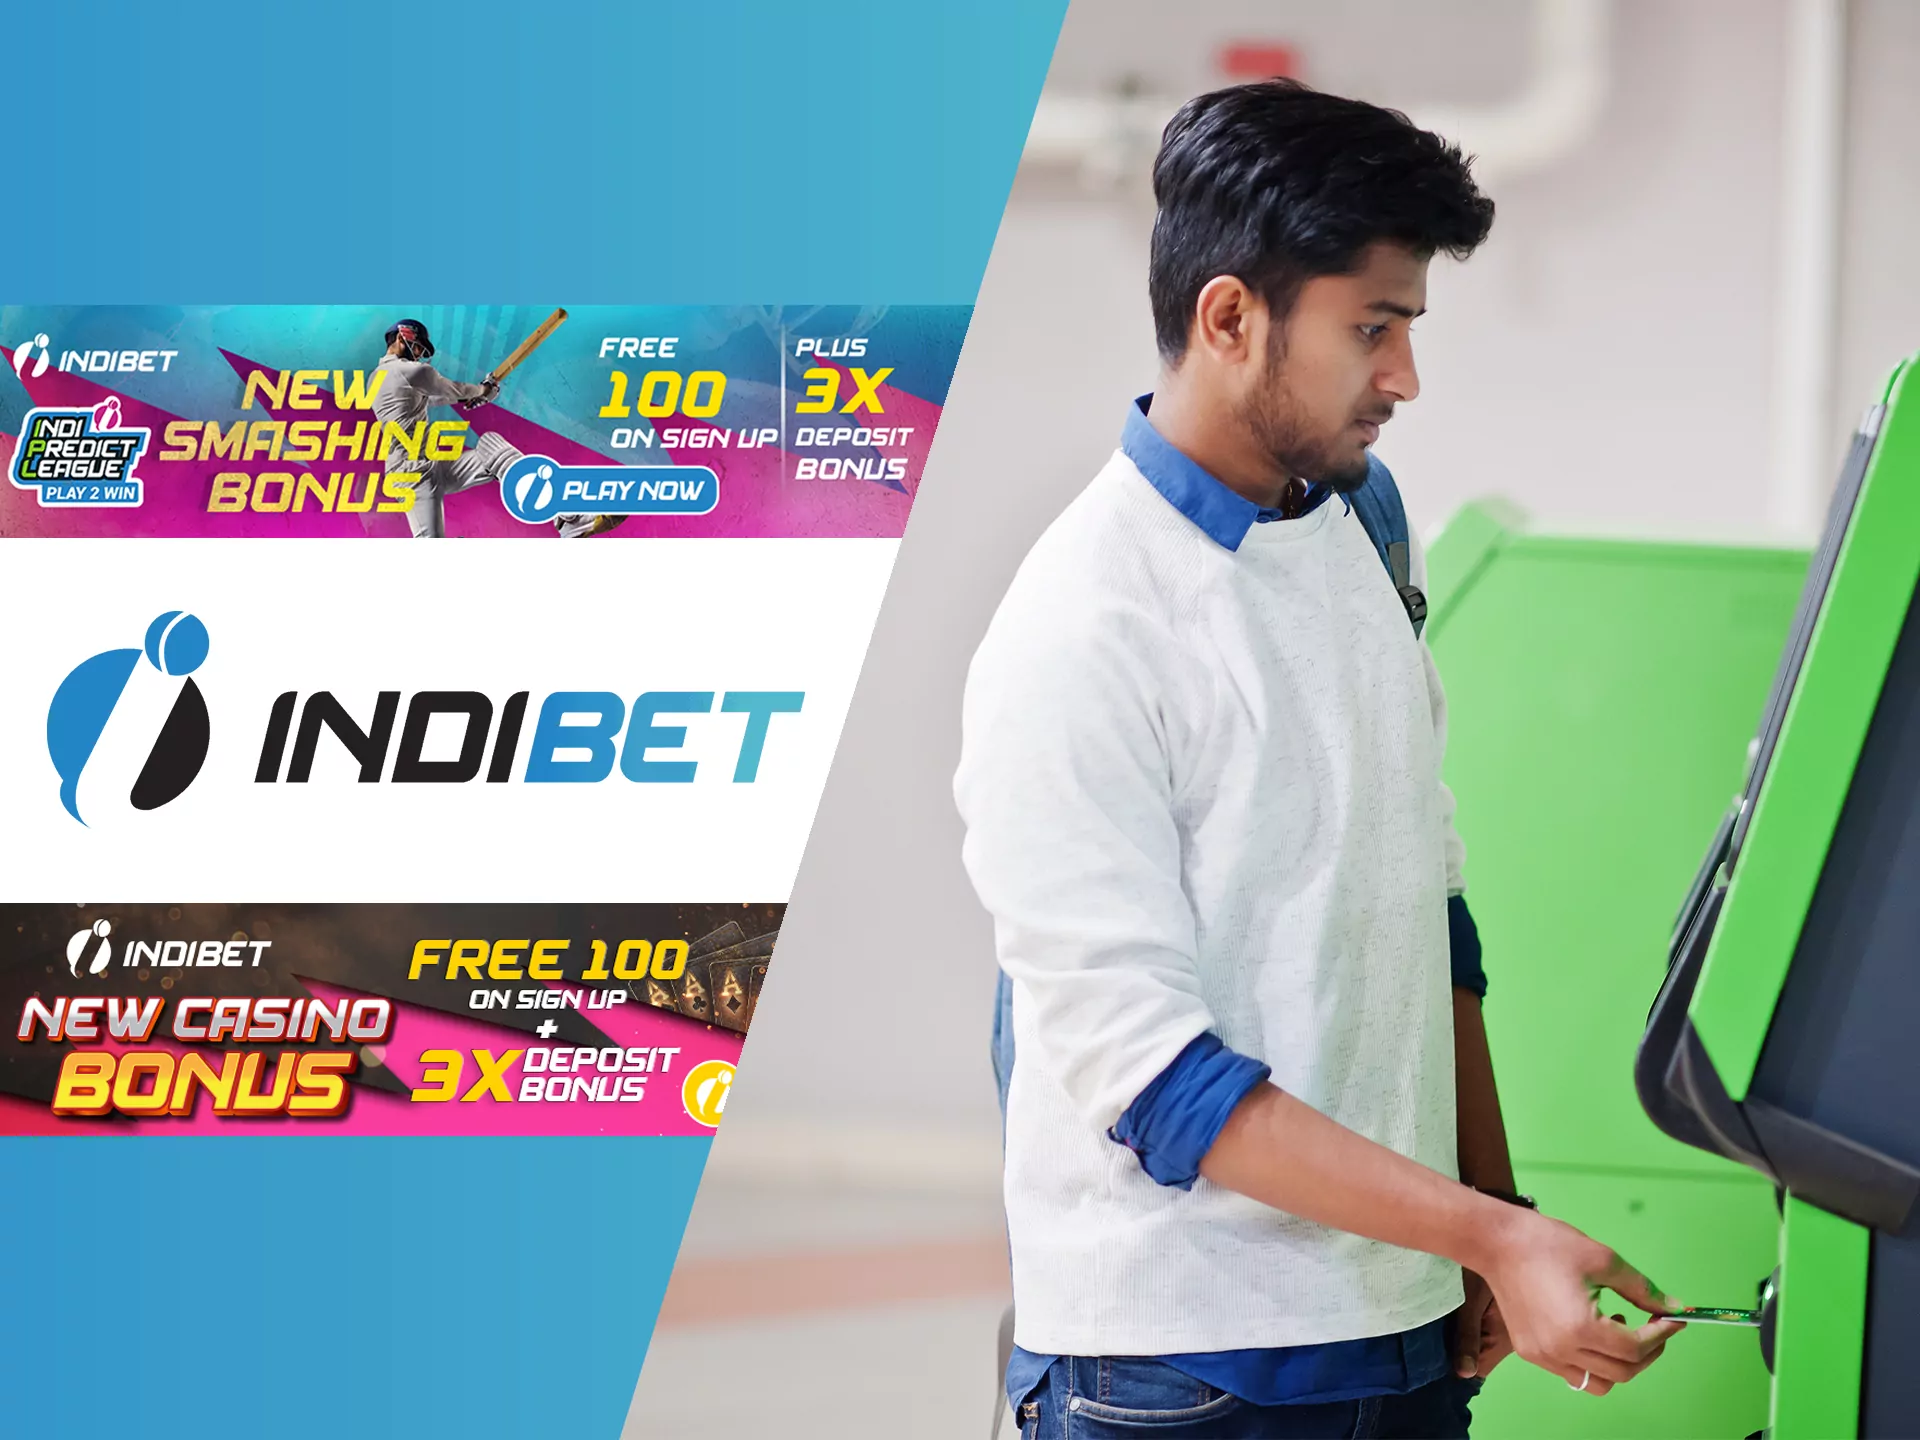 Deposit and withdraw without troubles at Indibet.